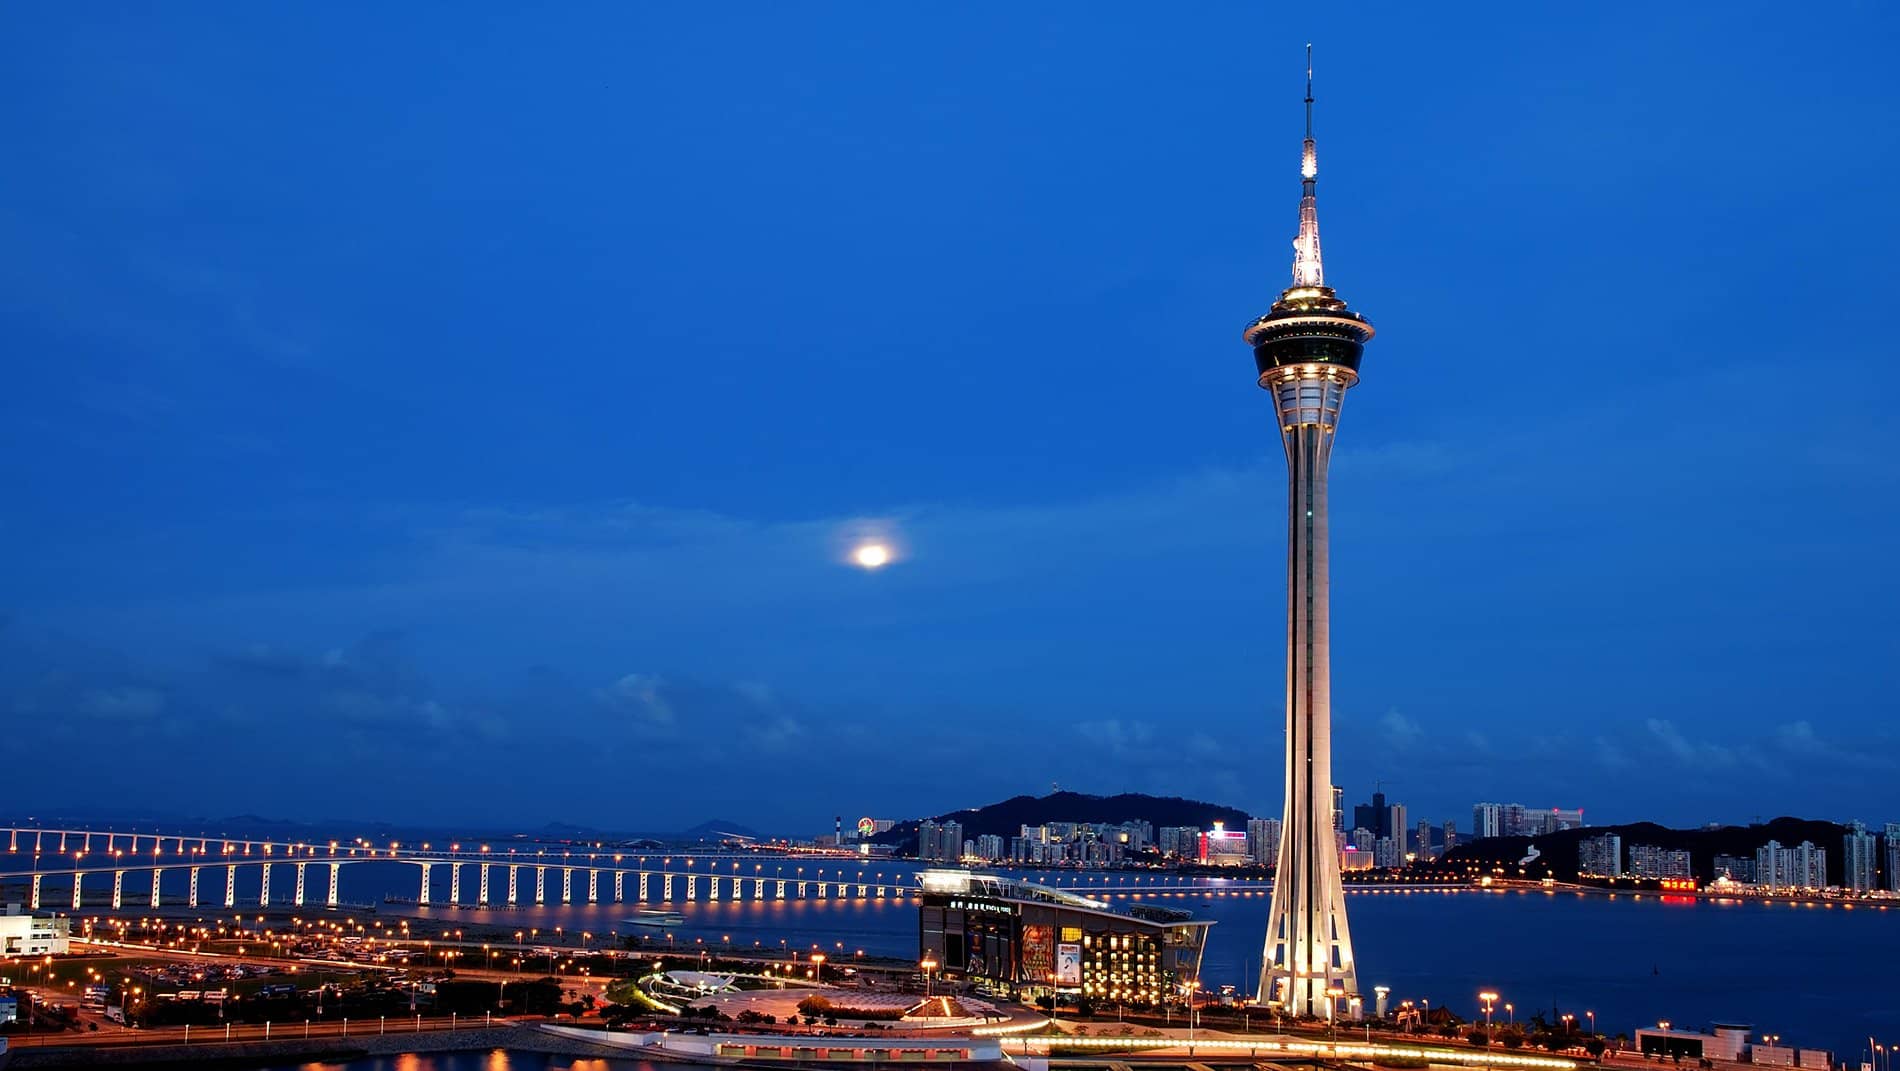 Macao Tower~The Macau Tower, Macau's tallest, is Stanley Ho's gift to the territory. Its observation deck features restaurants, theaters, shops and a sky walk. It also offers the highest commercial bungee jump in the world!